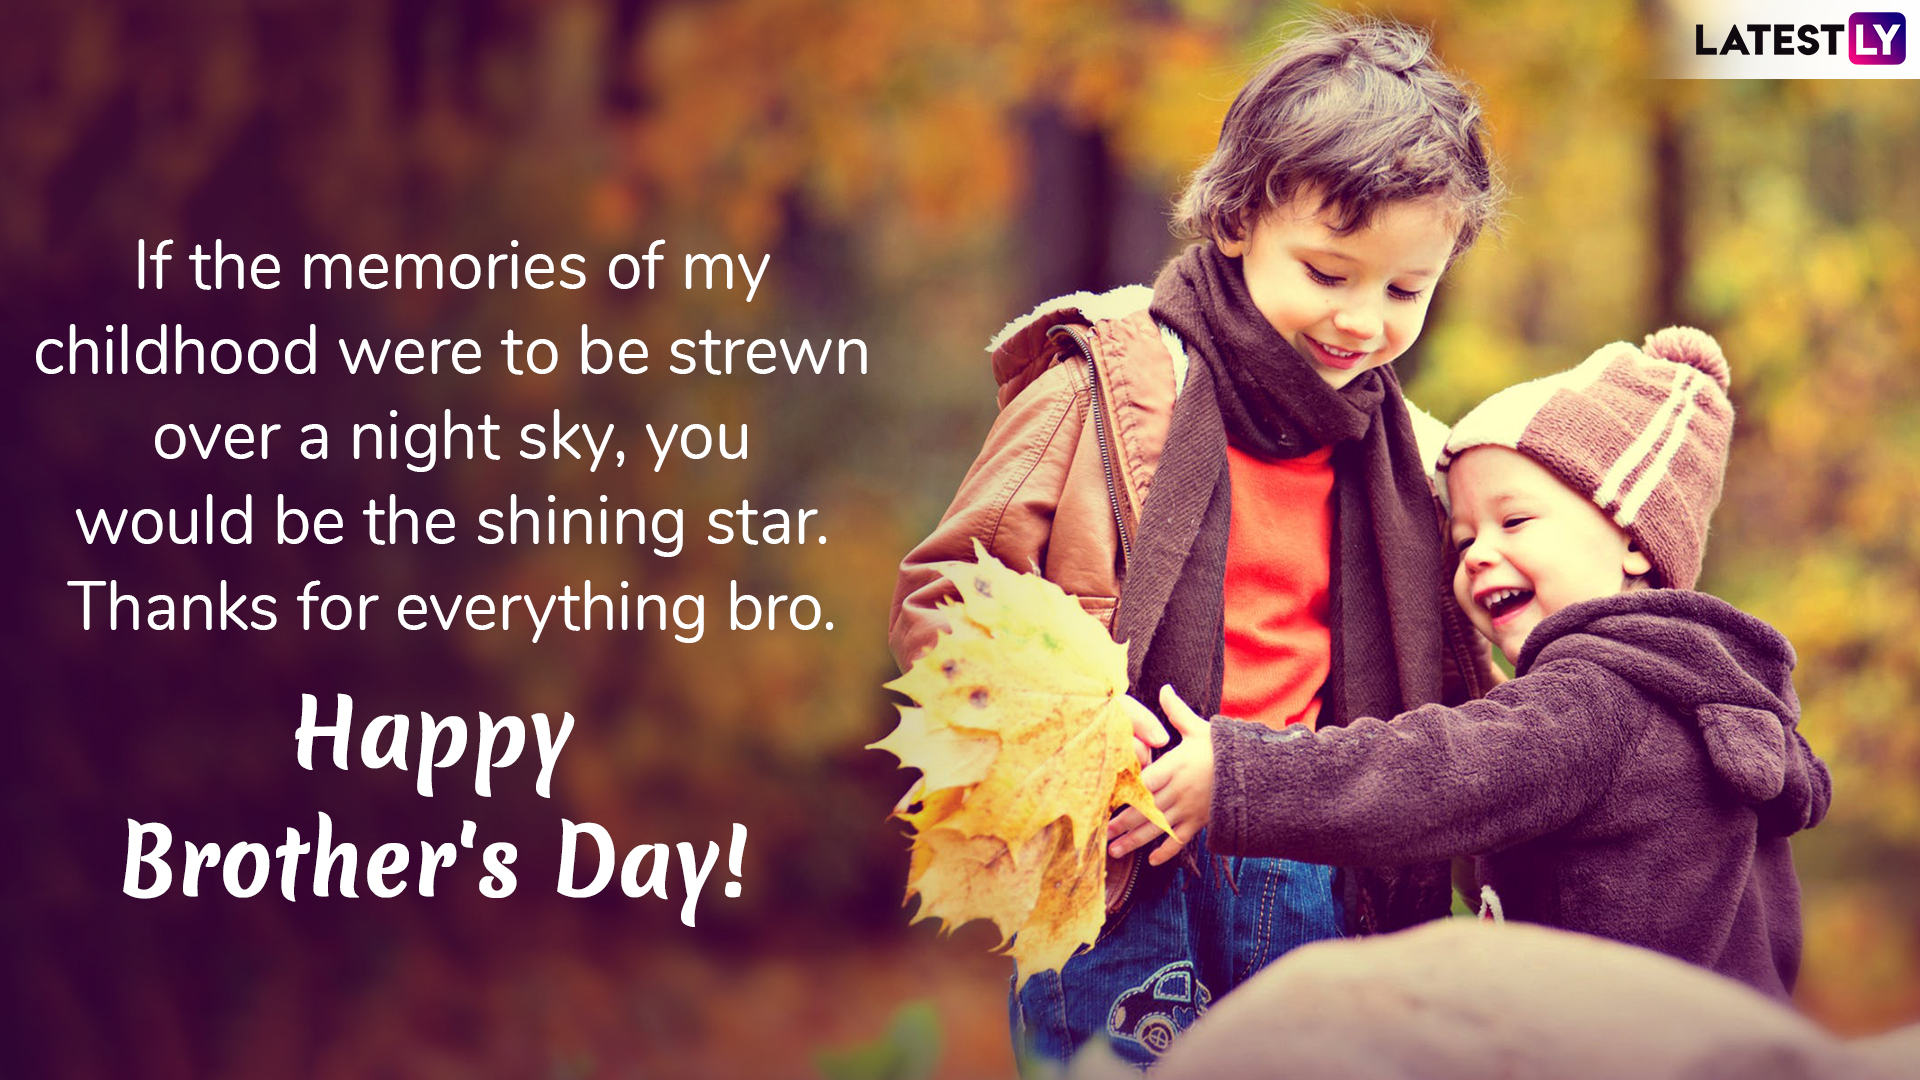 Happy Brothers Day Images Wish Greetings - vrogue.co